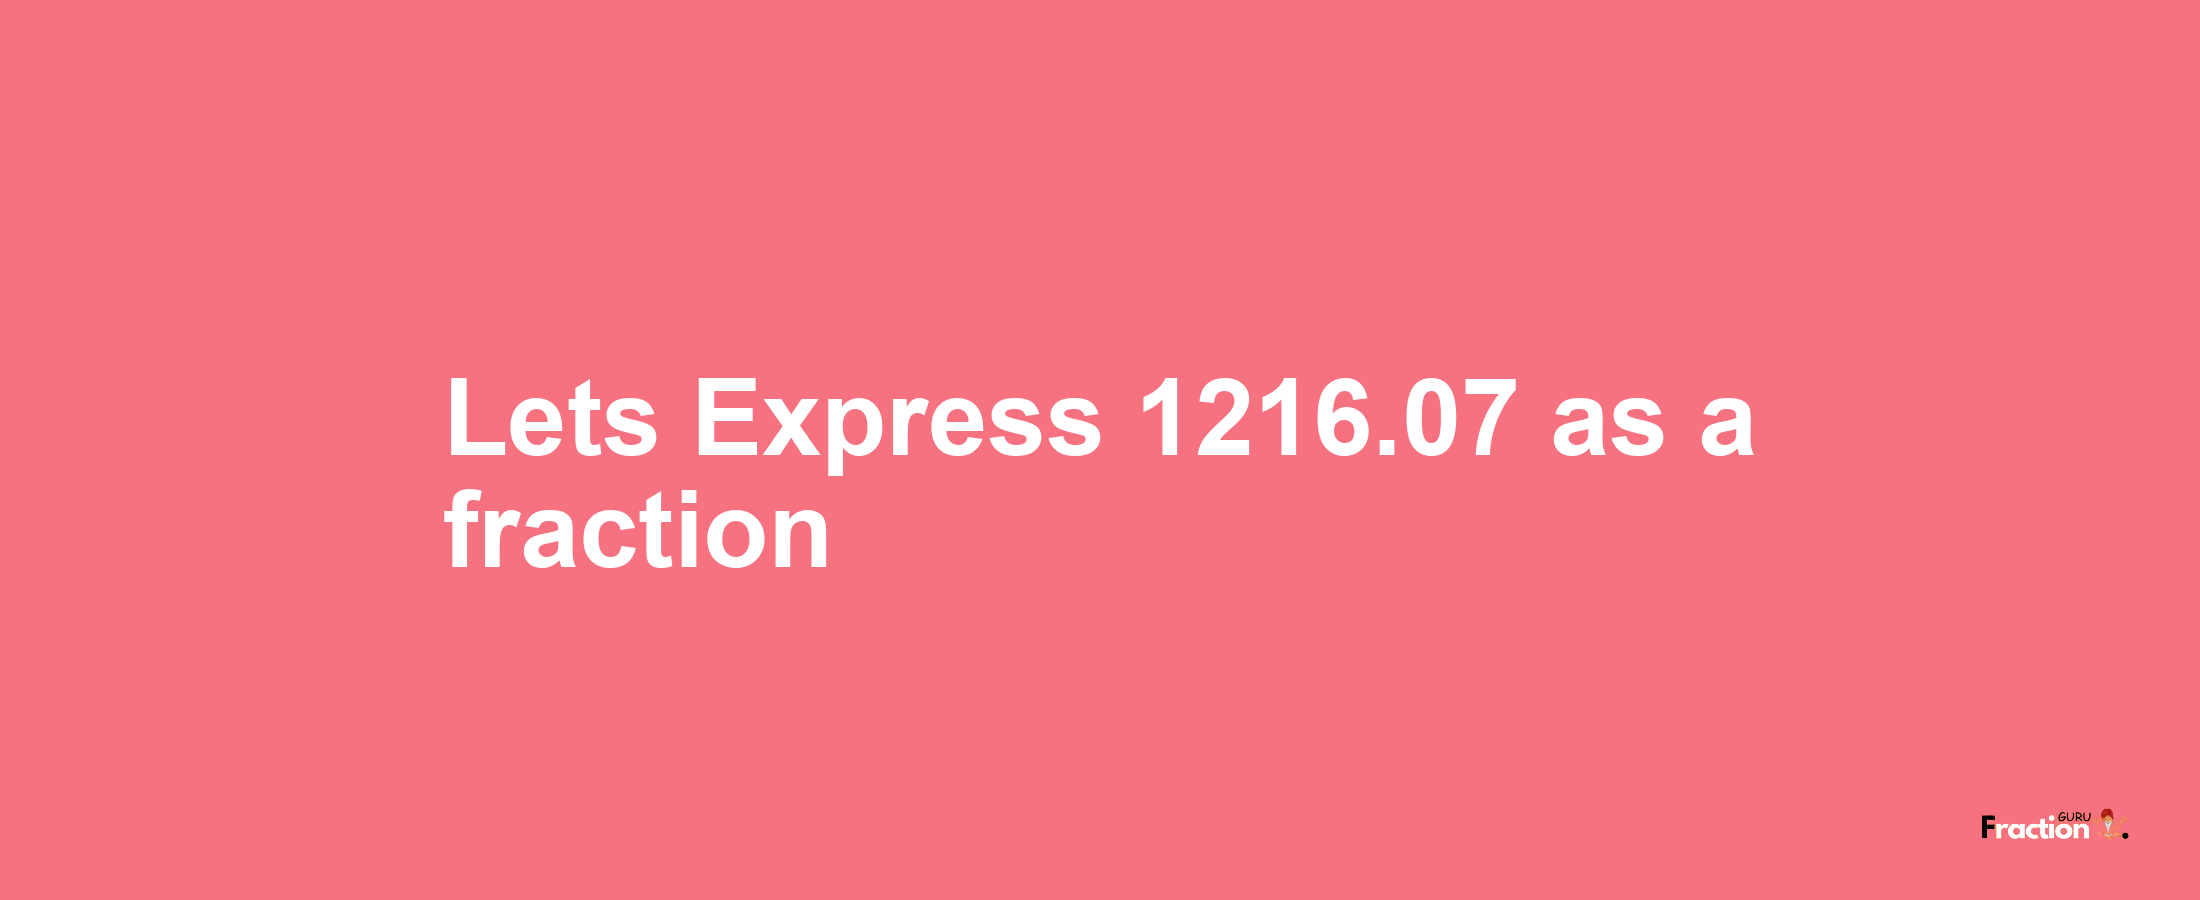 Lets Express 1216.07 as afraction